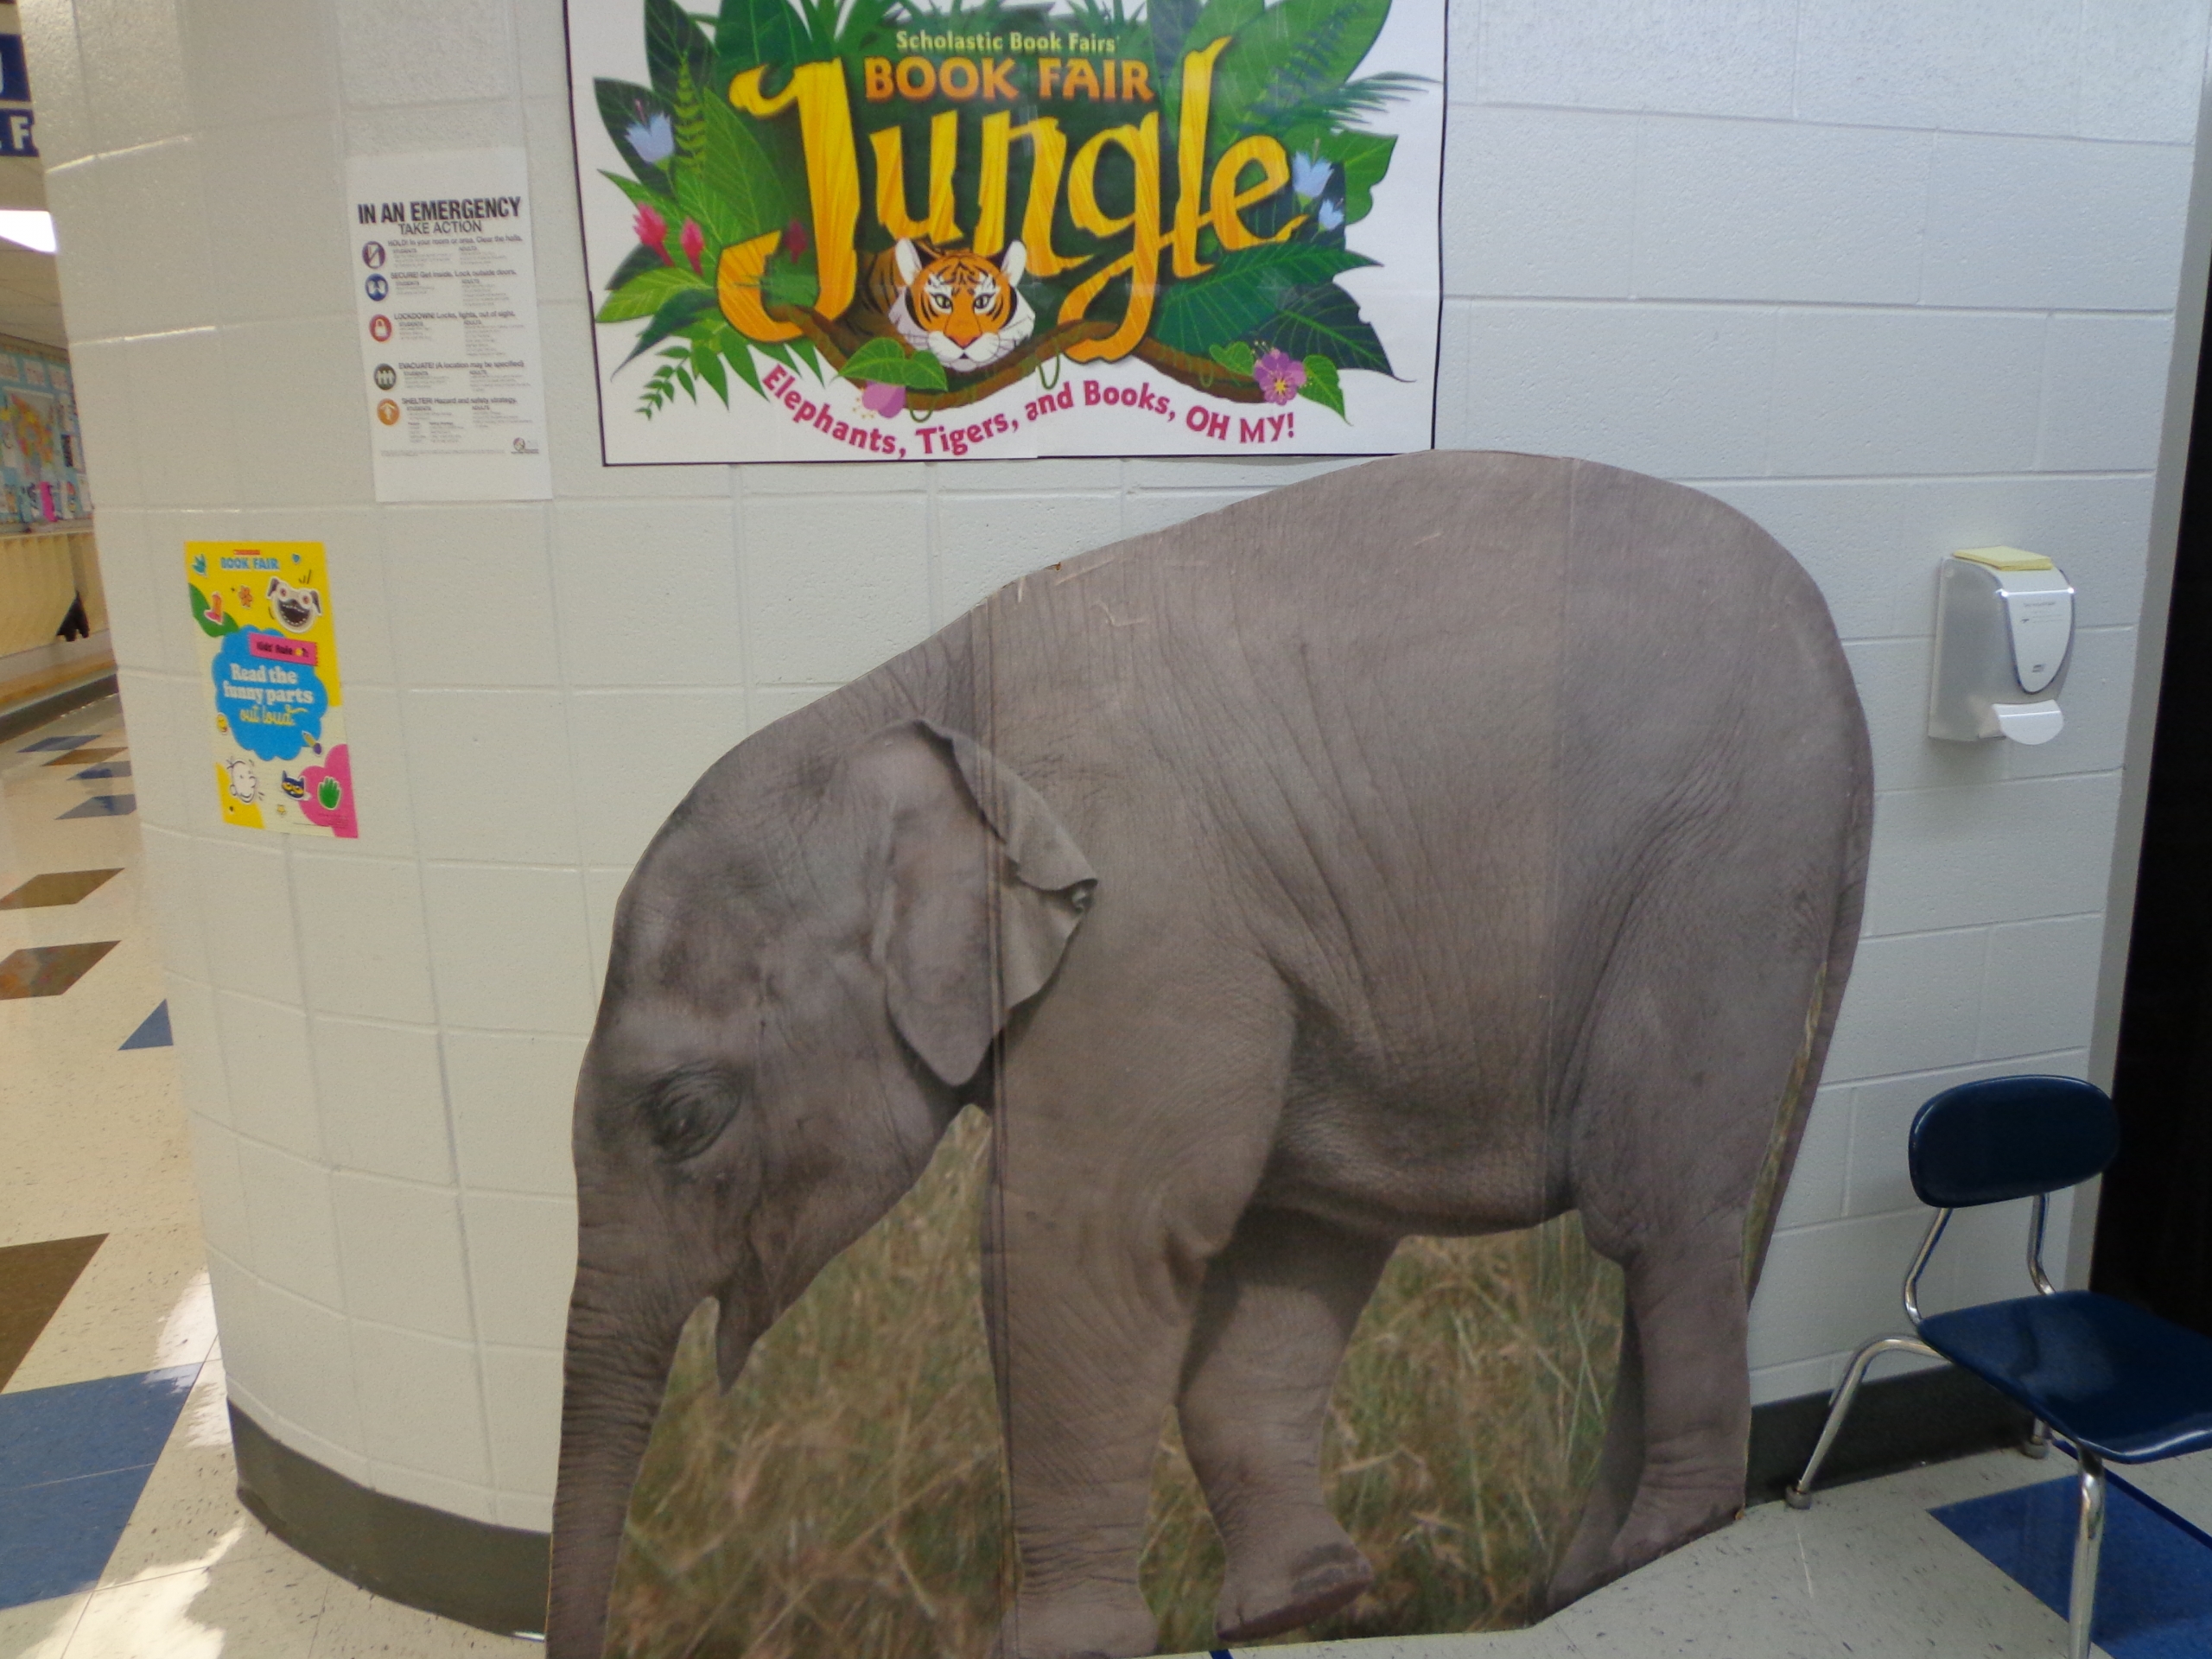 We had fun with our Jungle of Books Scholastic Book Fair. Thank you to everyone who helped make the Book Fair a success.